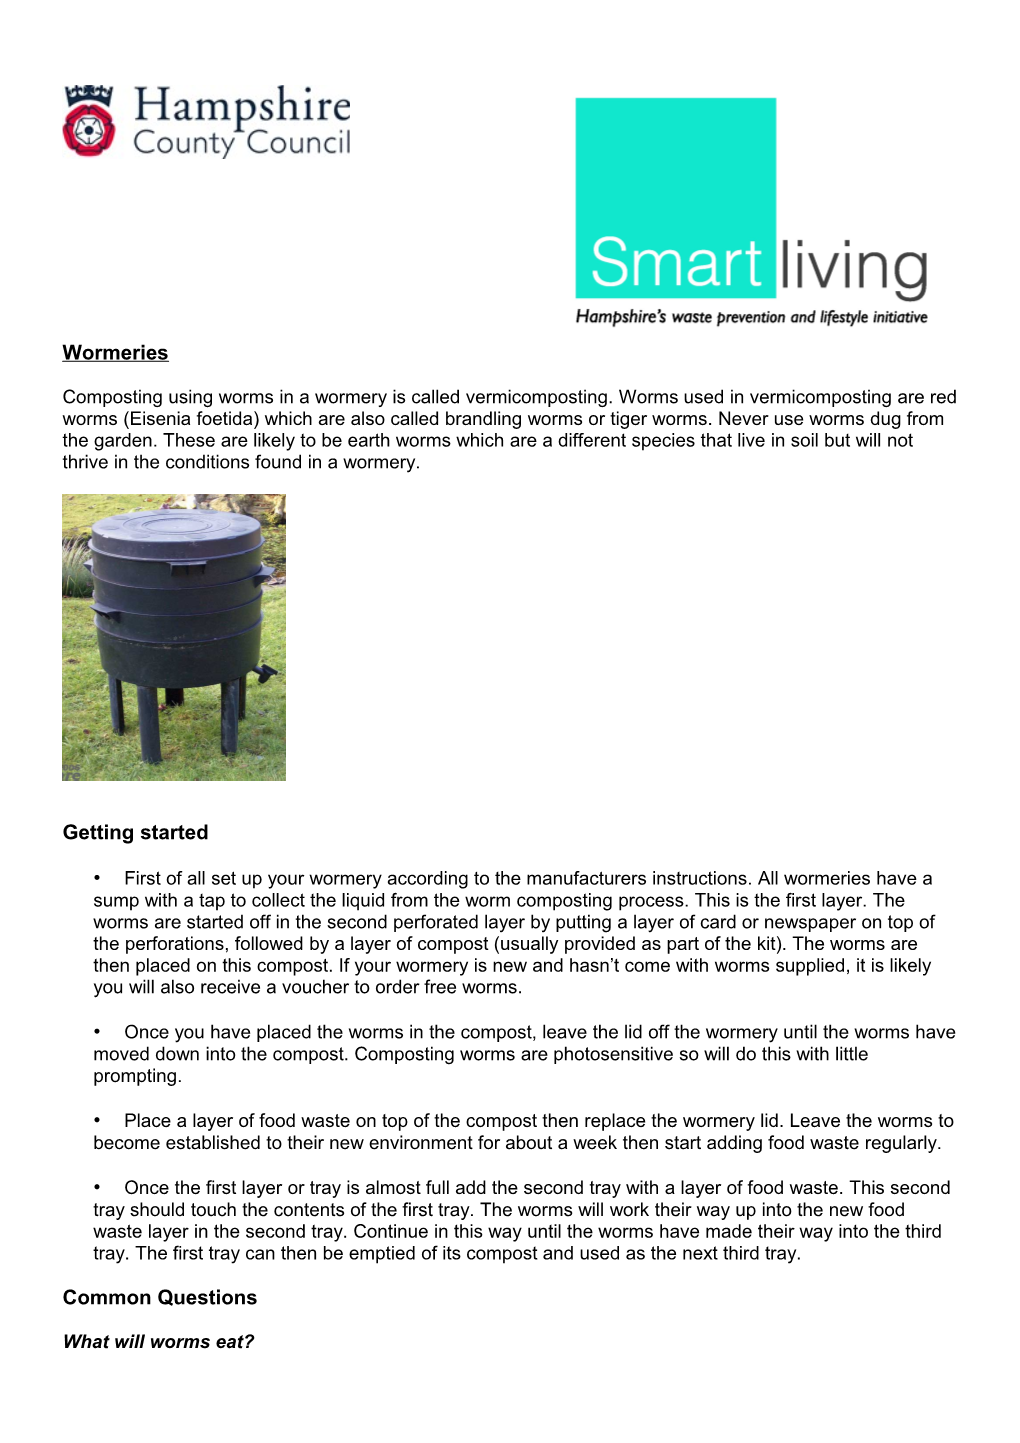 Composting Using Worms in a Wormery Is Called Vermicomposting. Worms Used in Vermicomposting